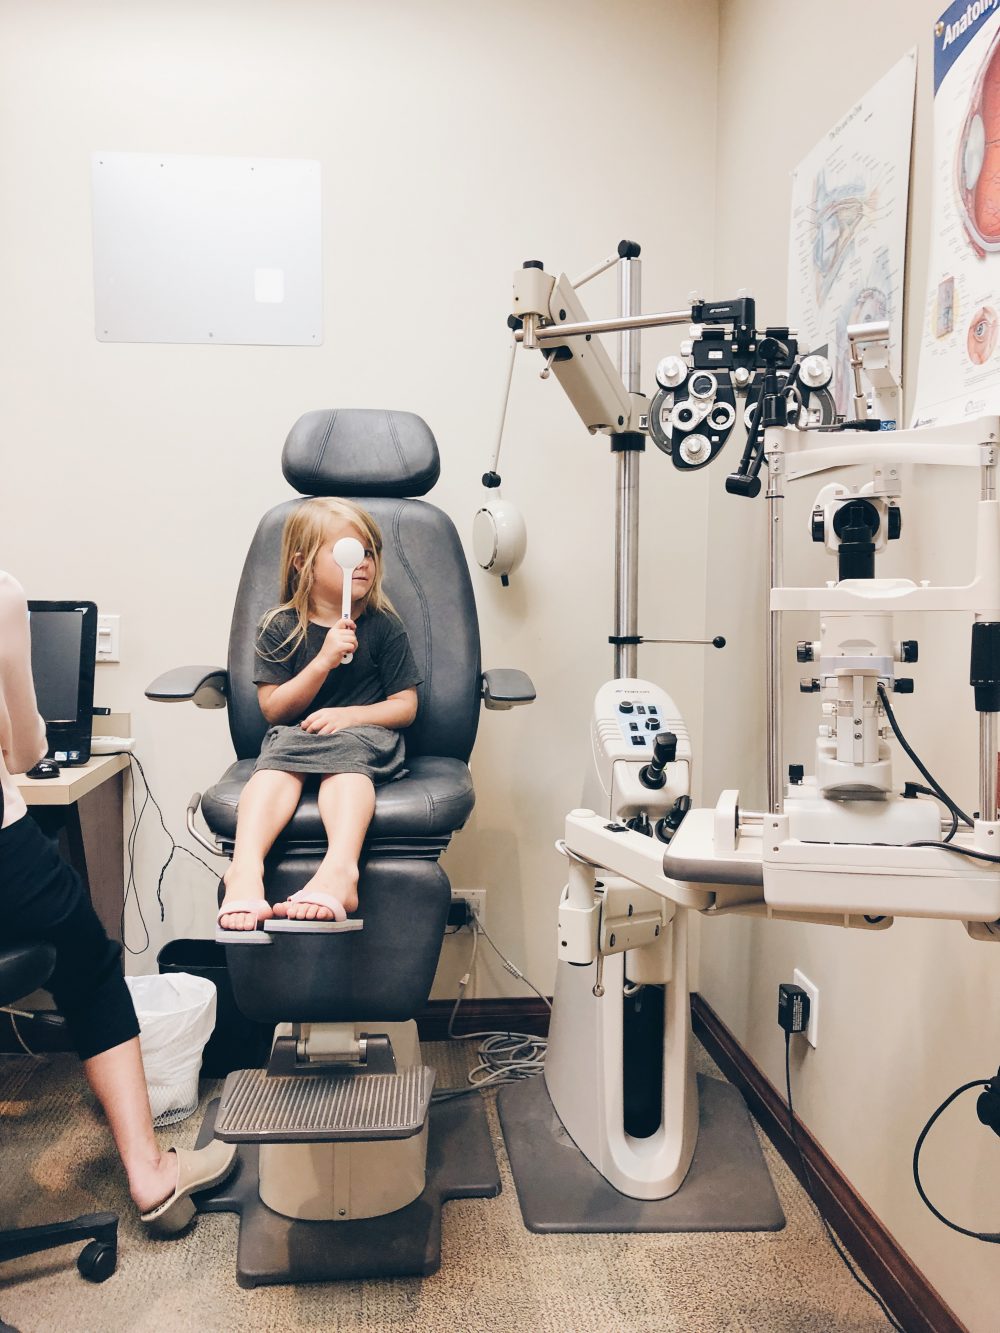 Getting my son's eye sight tested at IRIS visual group in Abbotsford | Back to school eye testing